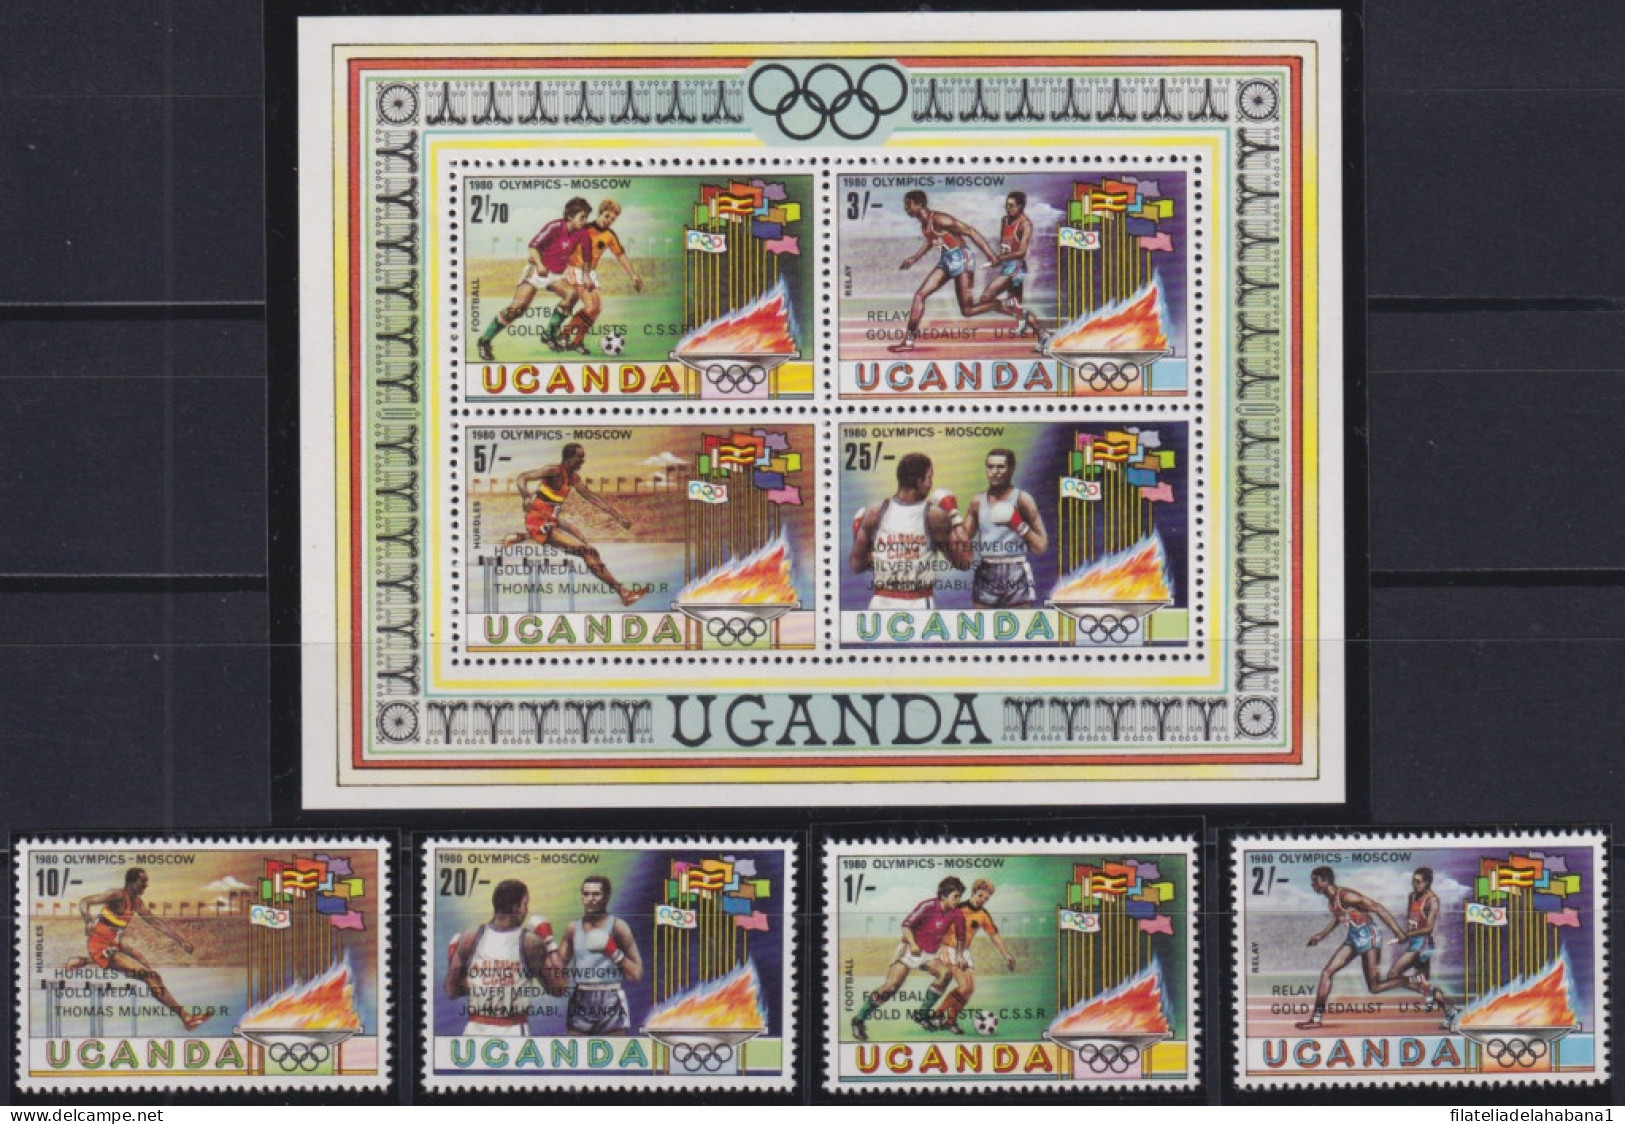 F-EX50254 UGANDA MNH 1980 OLYMPIC GAMES MOSCOW WINNER BOXING ATHLETISM SOCCER FOOTBALL.  - Verano 1980: Moscu